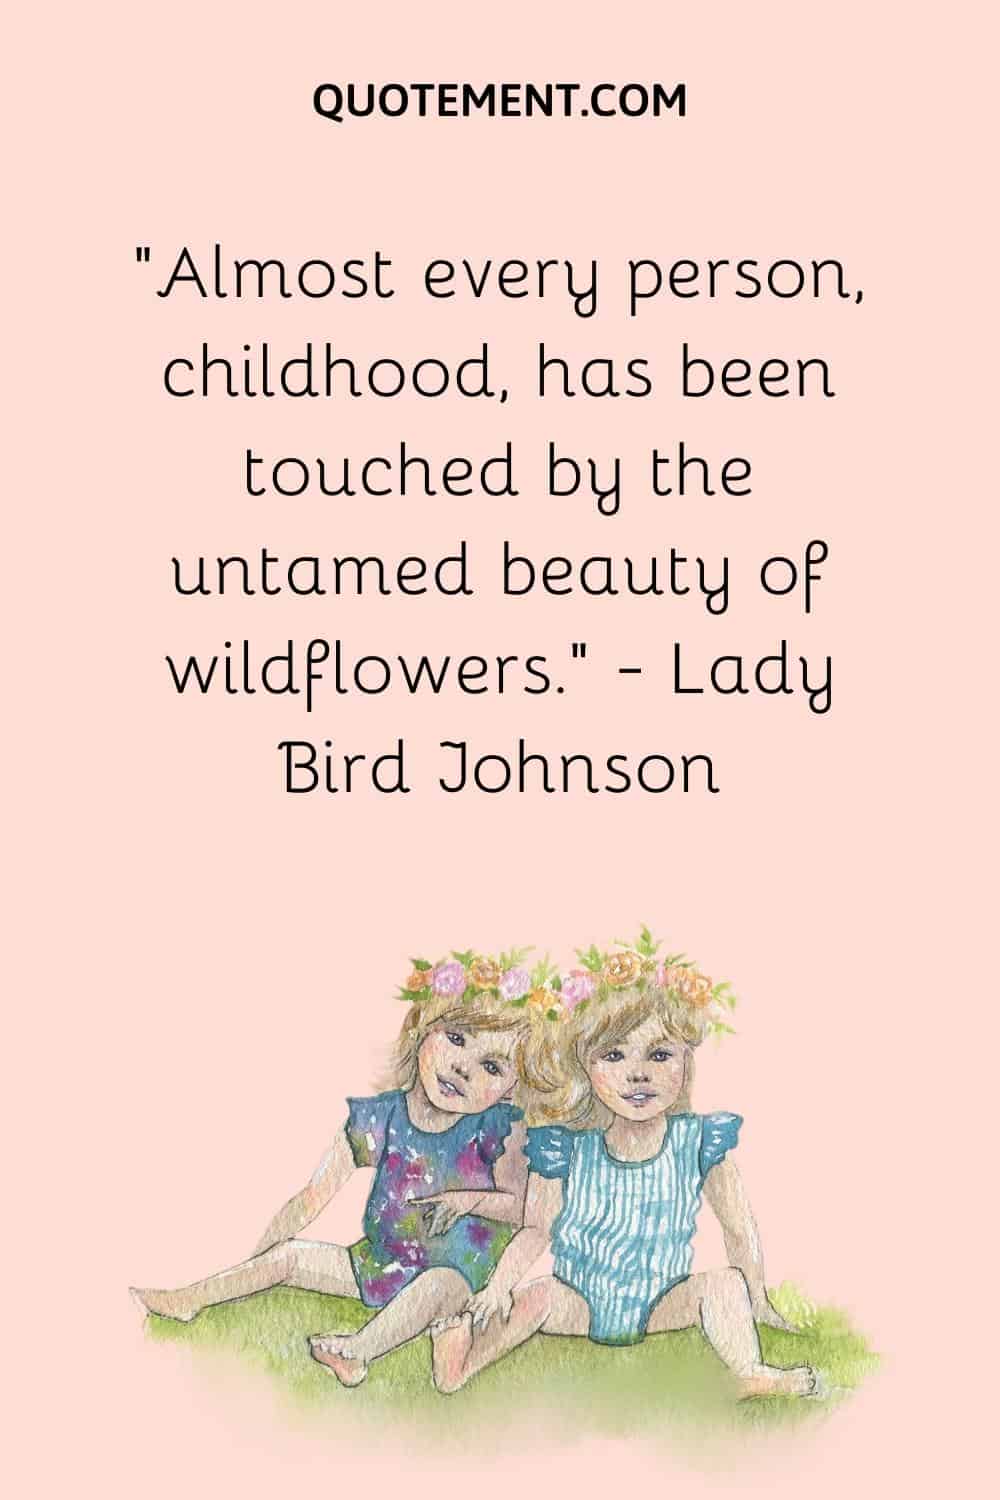 Almost every person, childhood, has been touched by the untamed beauty of wildflowers. — Lady Bird Johnson
